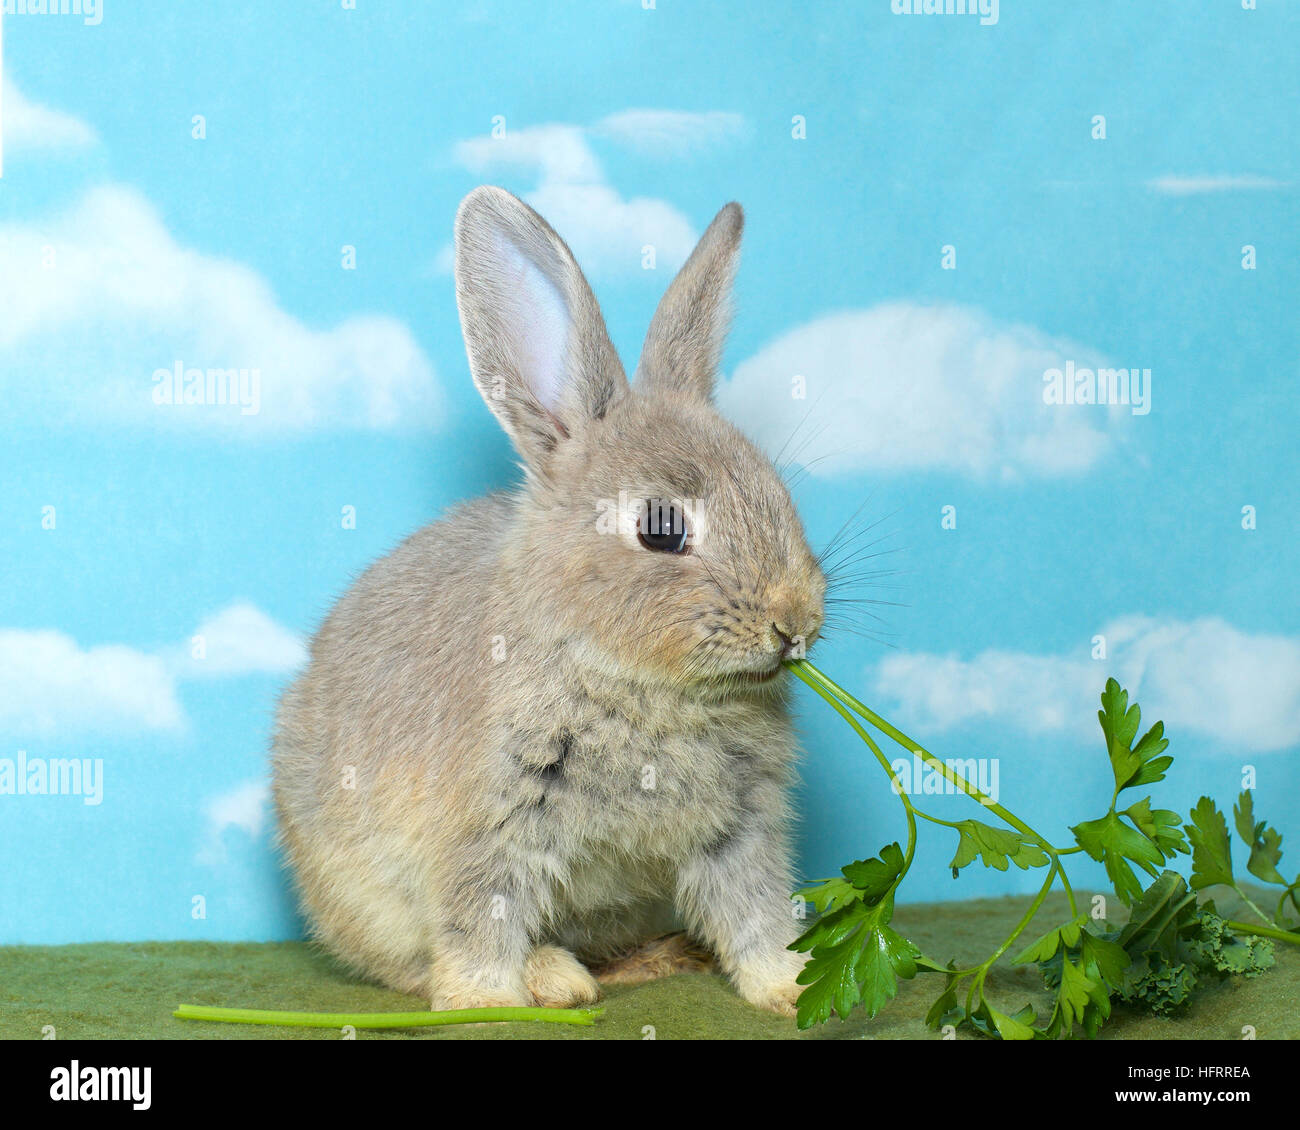 Netherland Dwarf rabbit on a green blanket eating vegetable greens, blue background with clouds Stock Photo